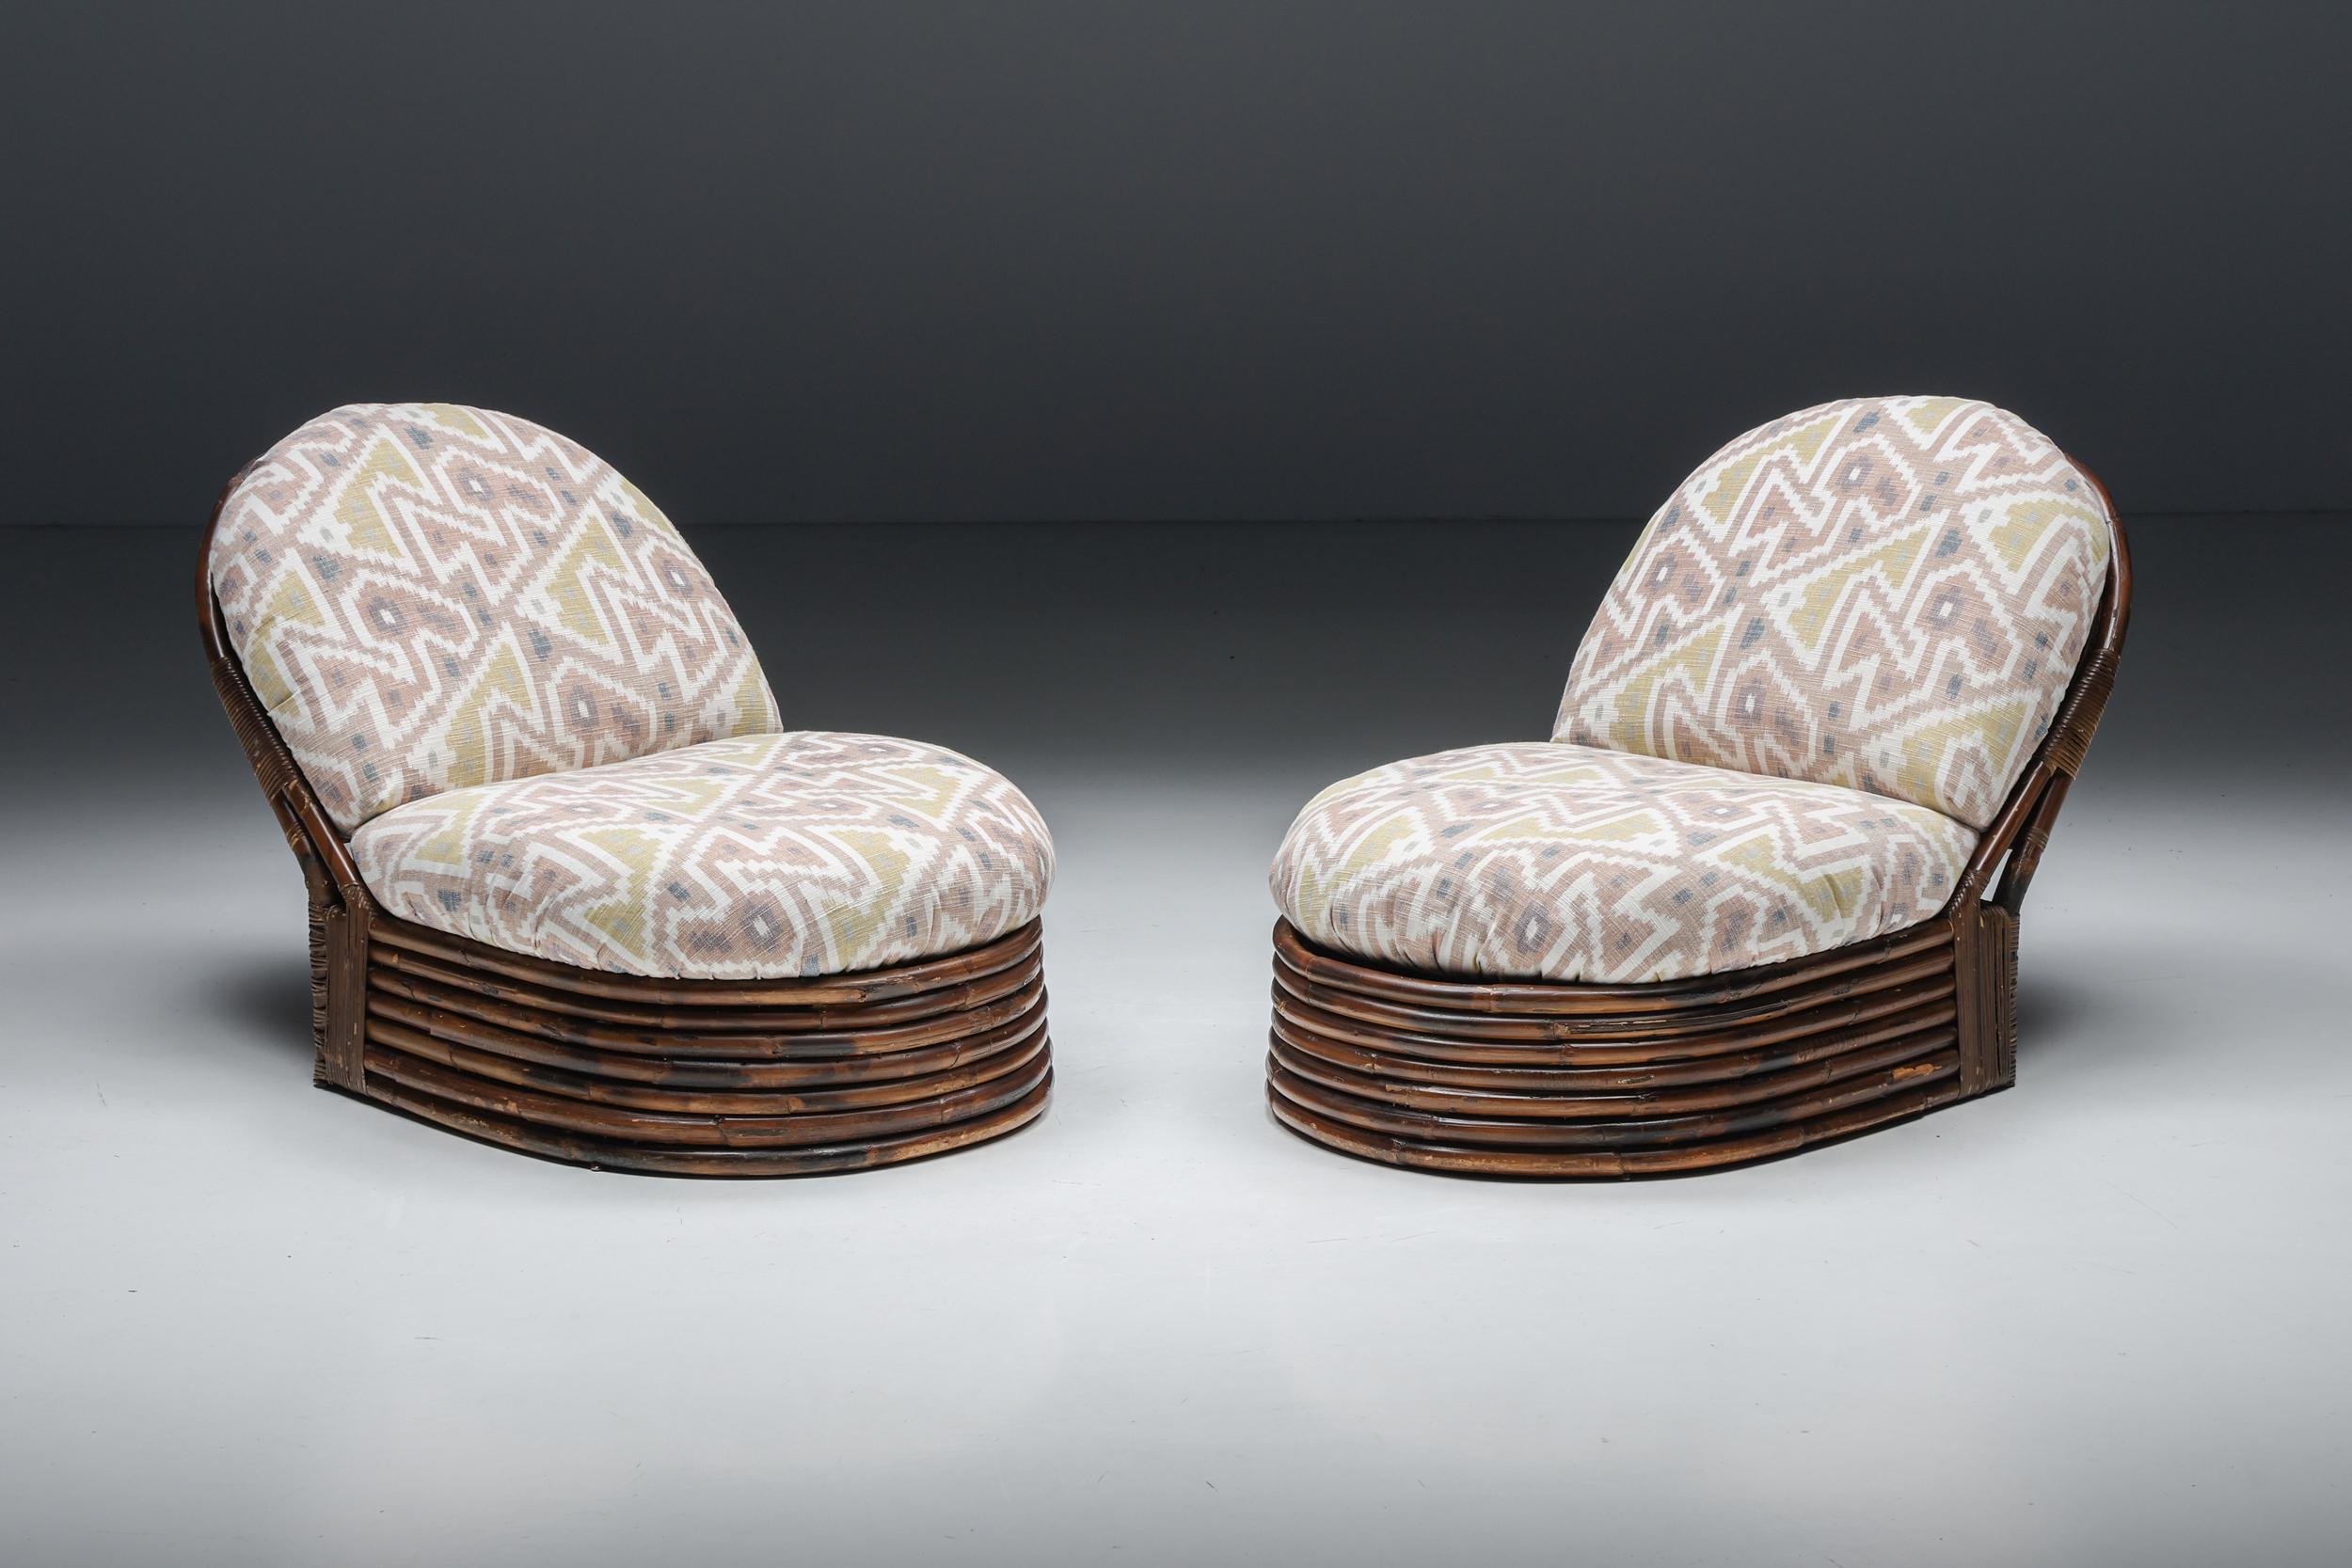 Late 20th Century Vivai Del Sud Bamboo Lounge Chairs, Pierre Frey Jacquard, 1970s For Sale